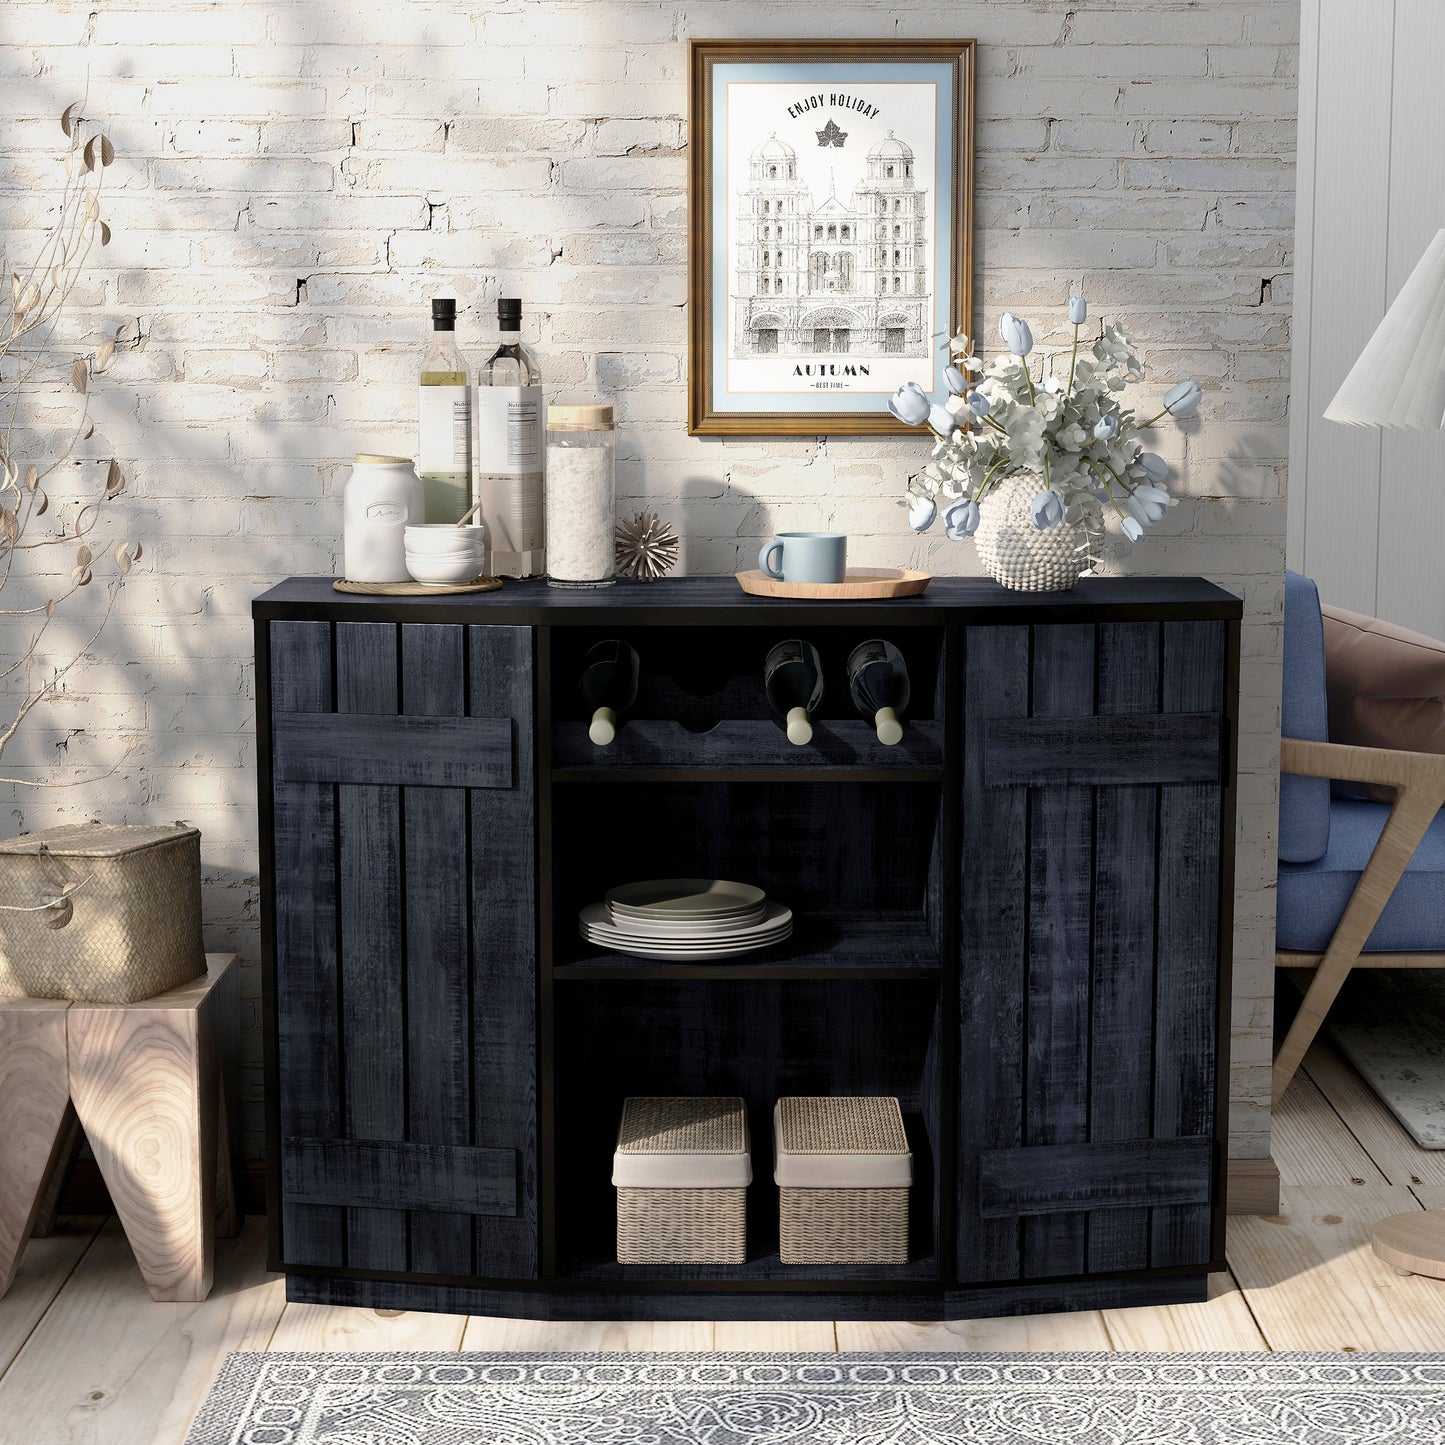 Front-facing farmhouse rustic navy blue four-bottle buffet cabinet with two doors in a living area with accessories